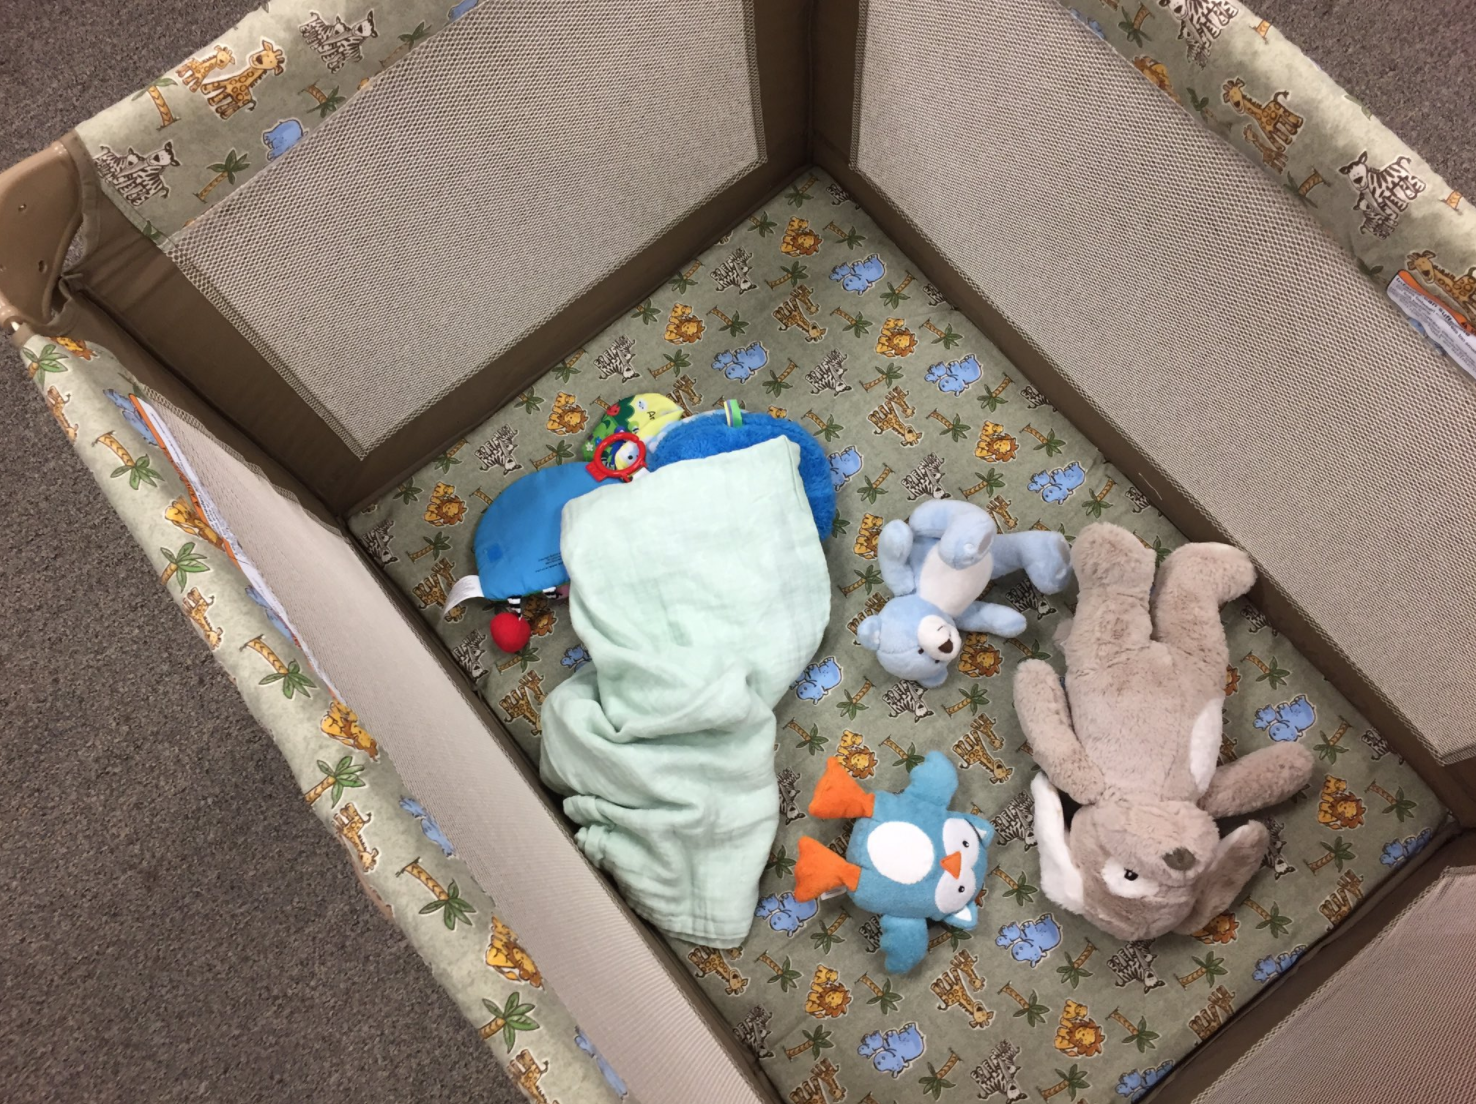 Baltimore City Health Department Example of Unsafe Crib not following ABCs of Safe Sleep